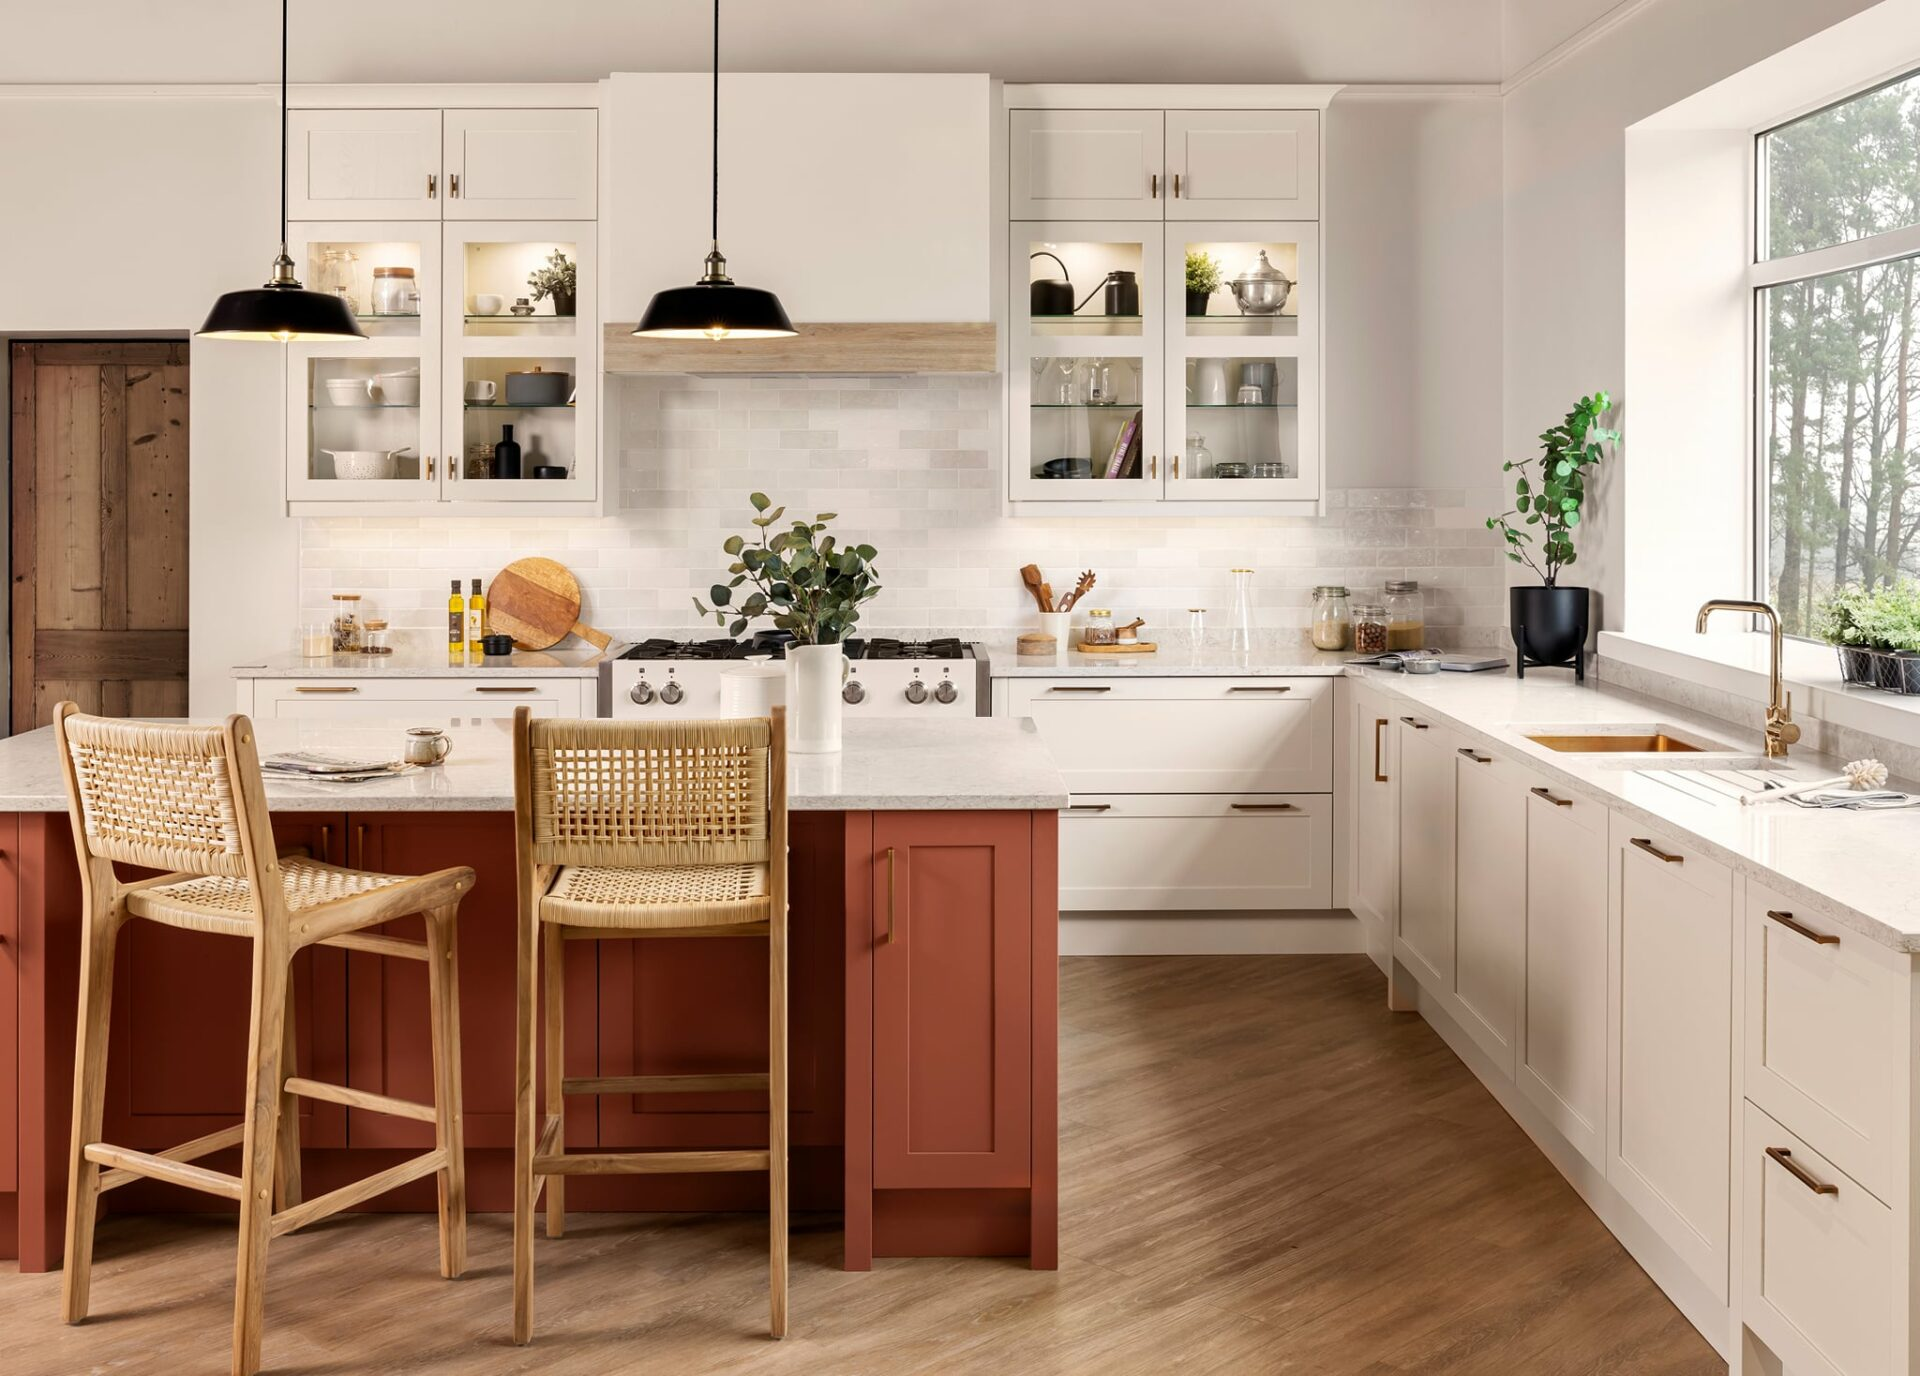 A cosy kitchen bathed in warm earthy tones with natural light streaming in